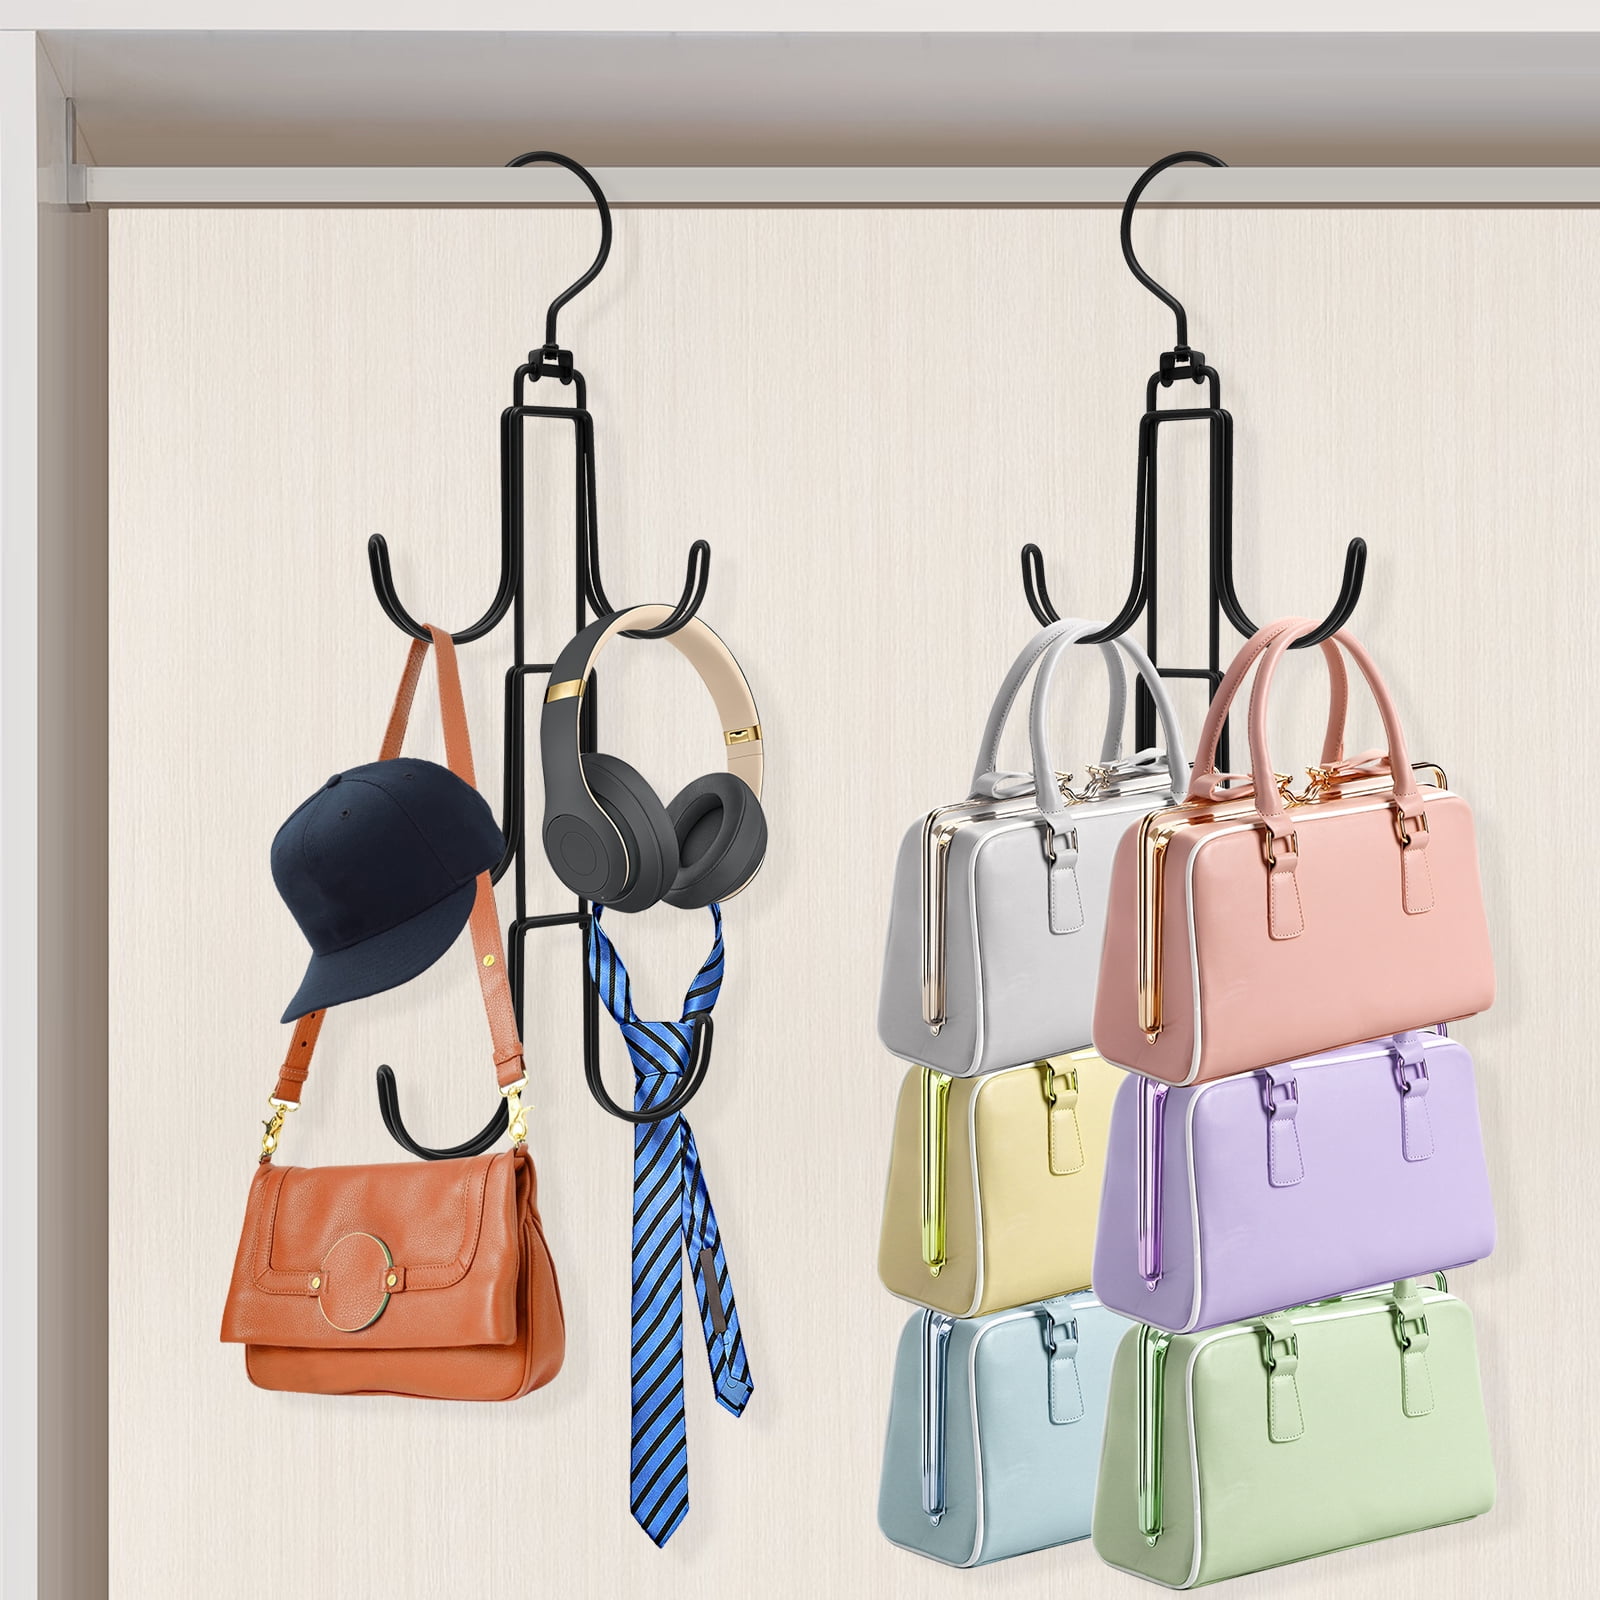 Cut Down on Closet Clutter With This Versatile $7 Purse Hanger